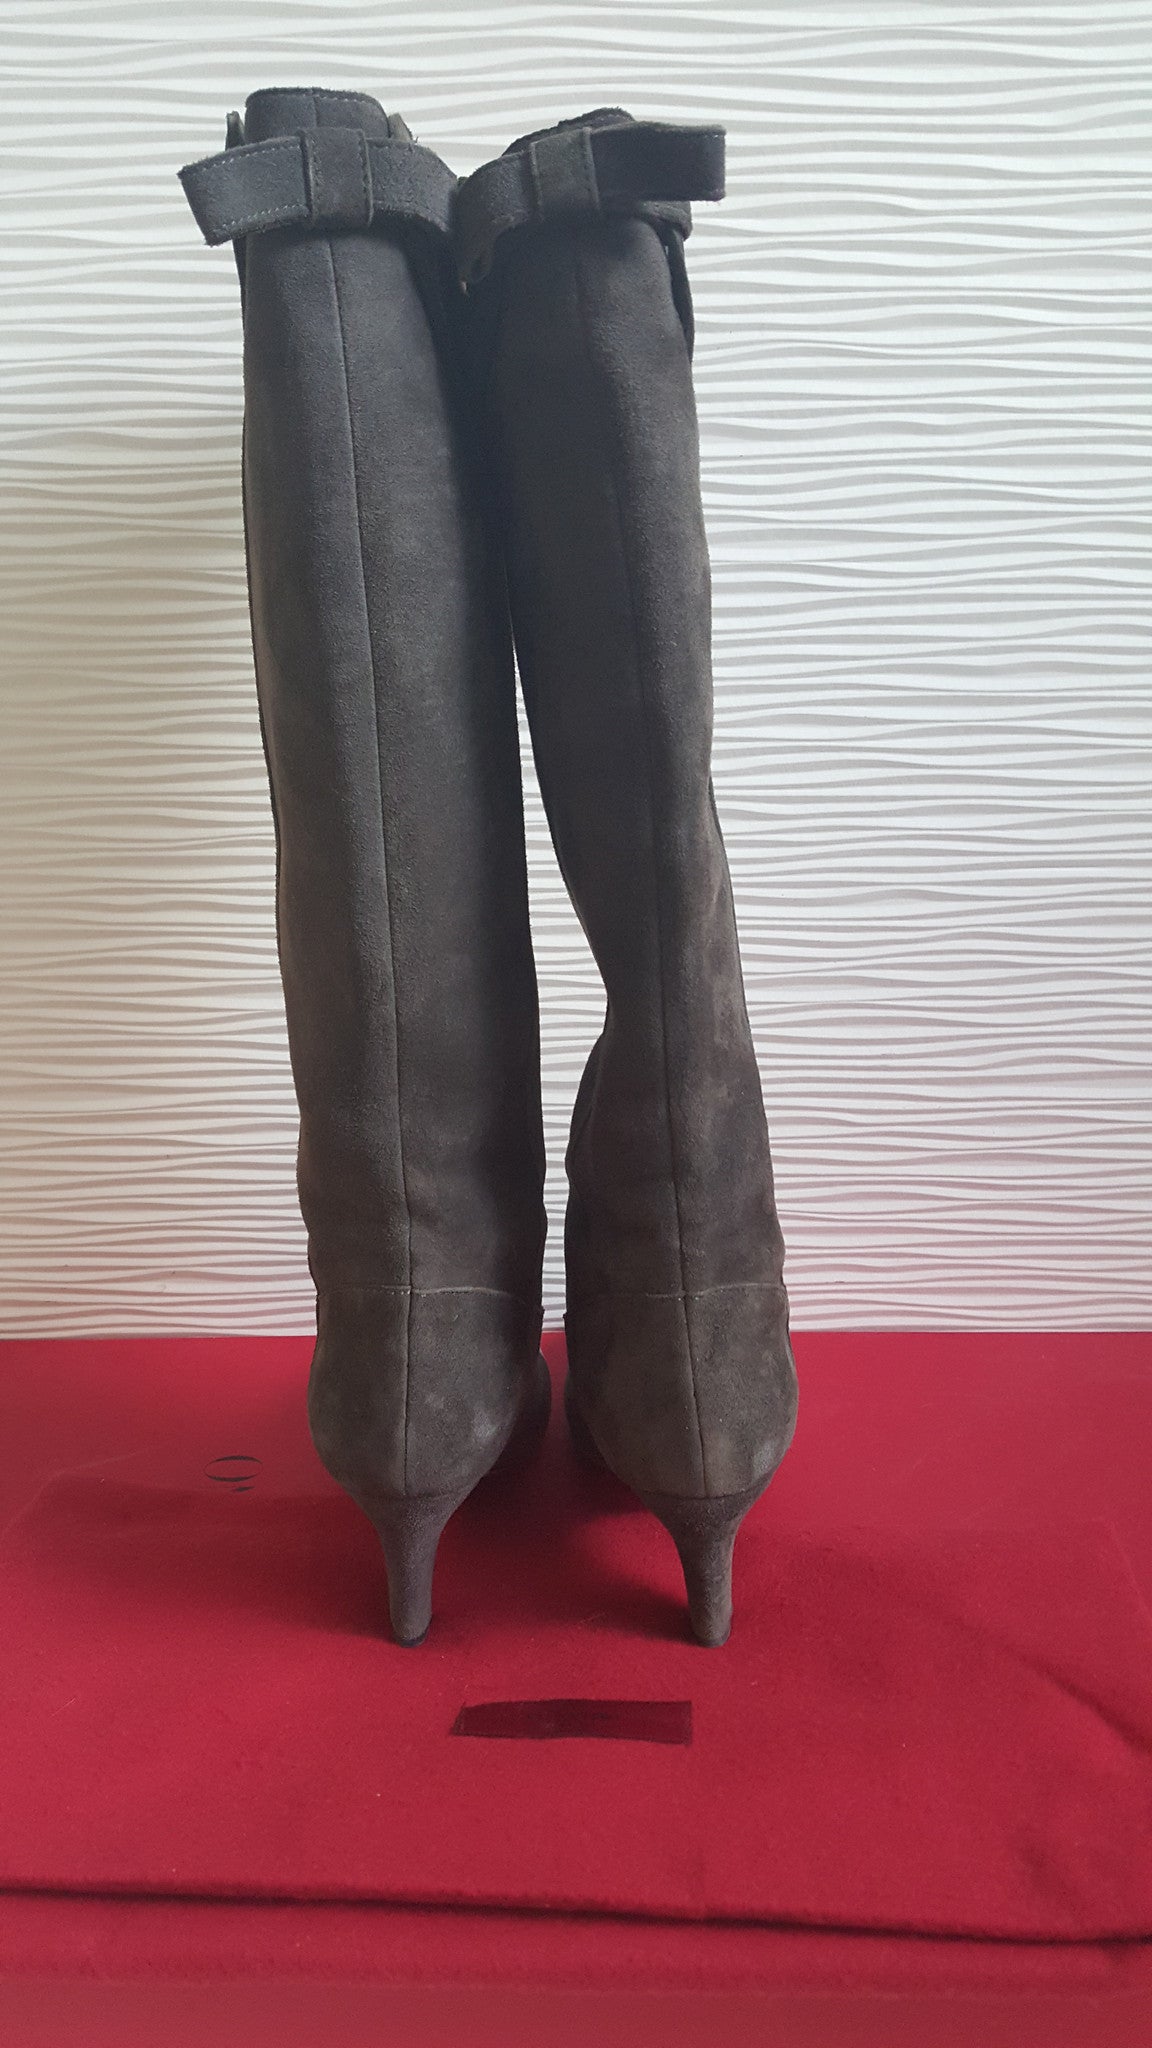 VALENTINO HIGH SUEDE BOOTS - GRAY - SIZE 36.5